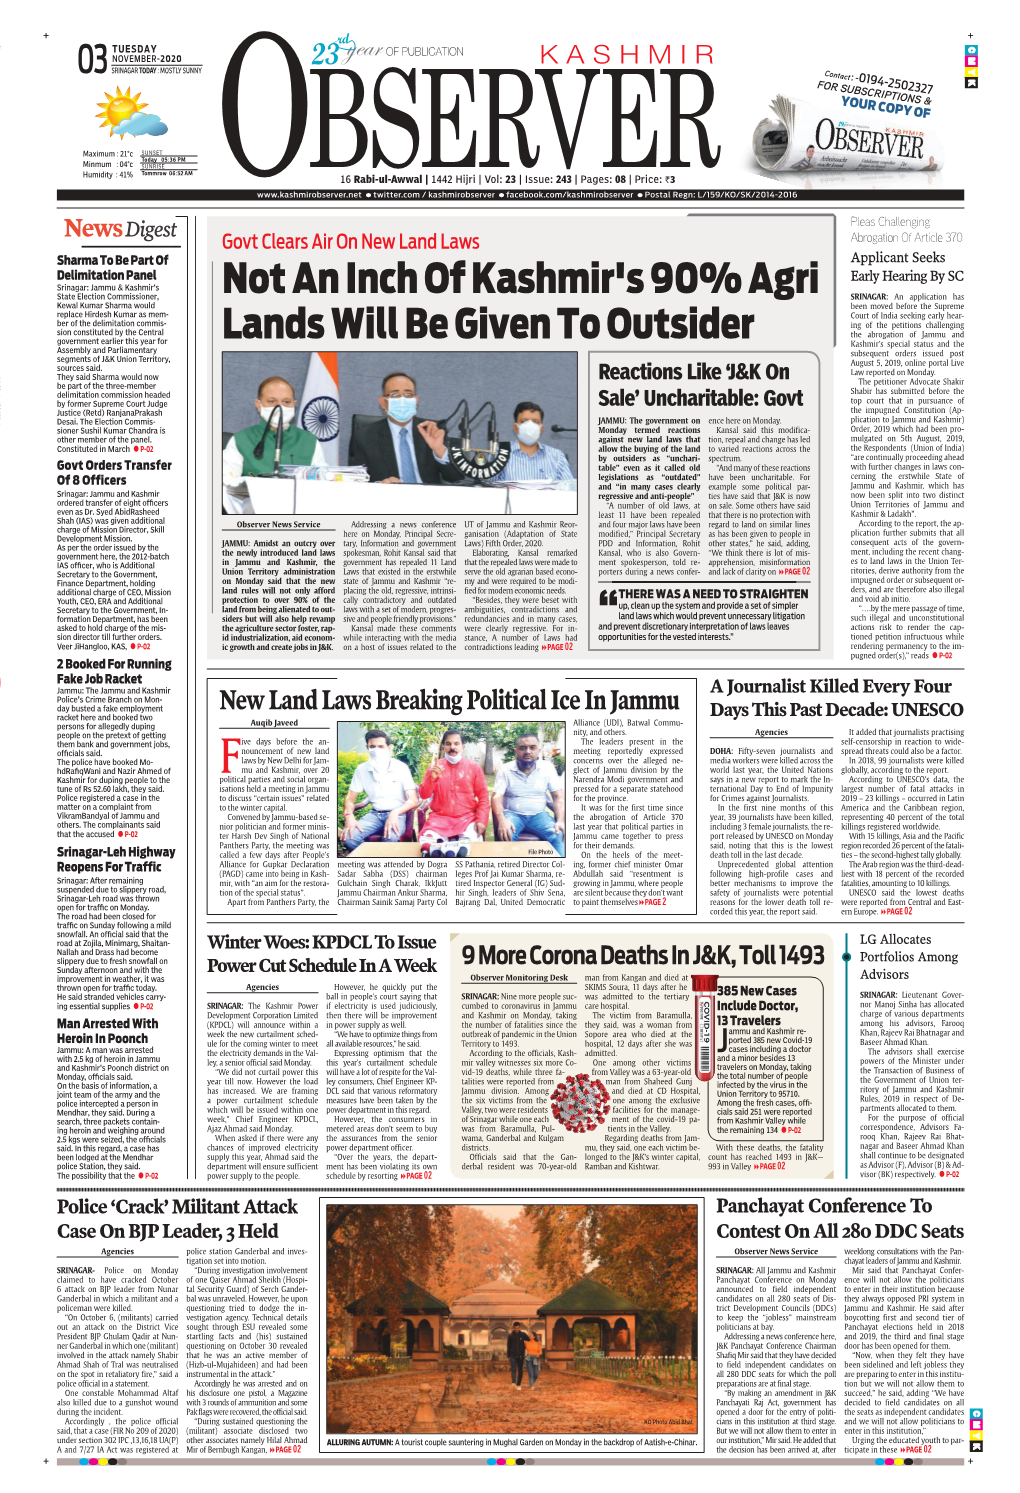 Not an Inch of Kashmir's 90% Agri Lands Will Be Given to Outsider